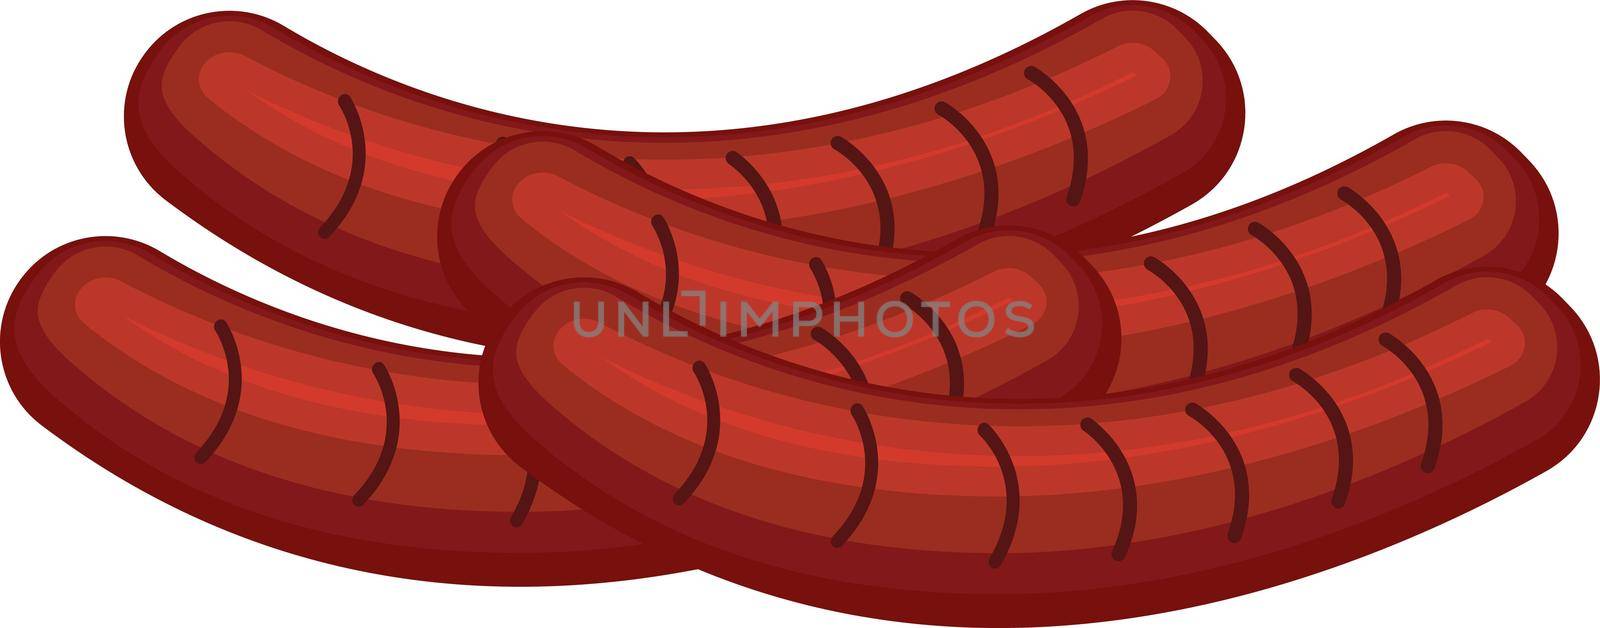 Grilled sausage, illustration, vector on white background. by Morphart